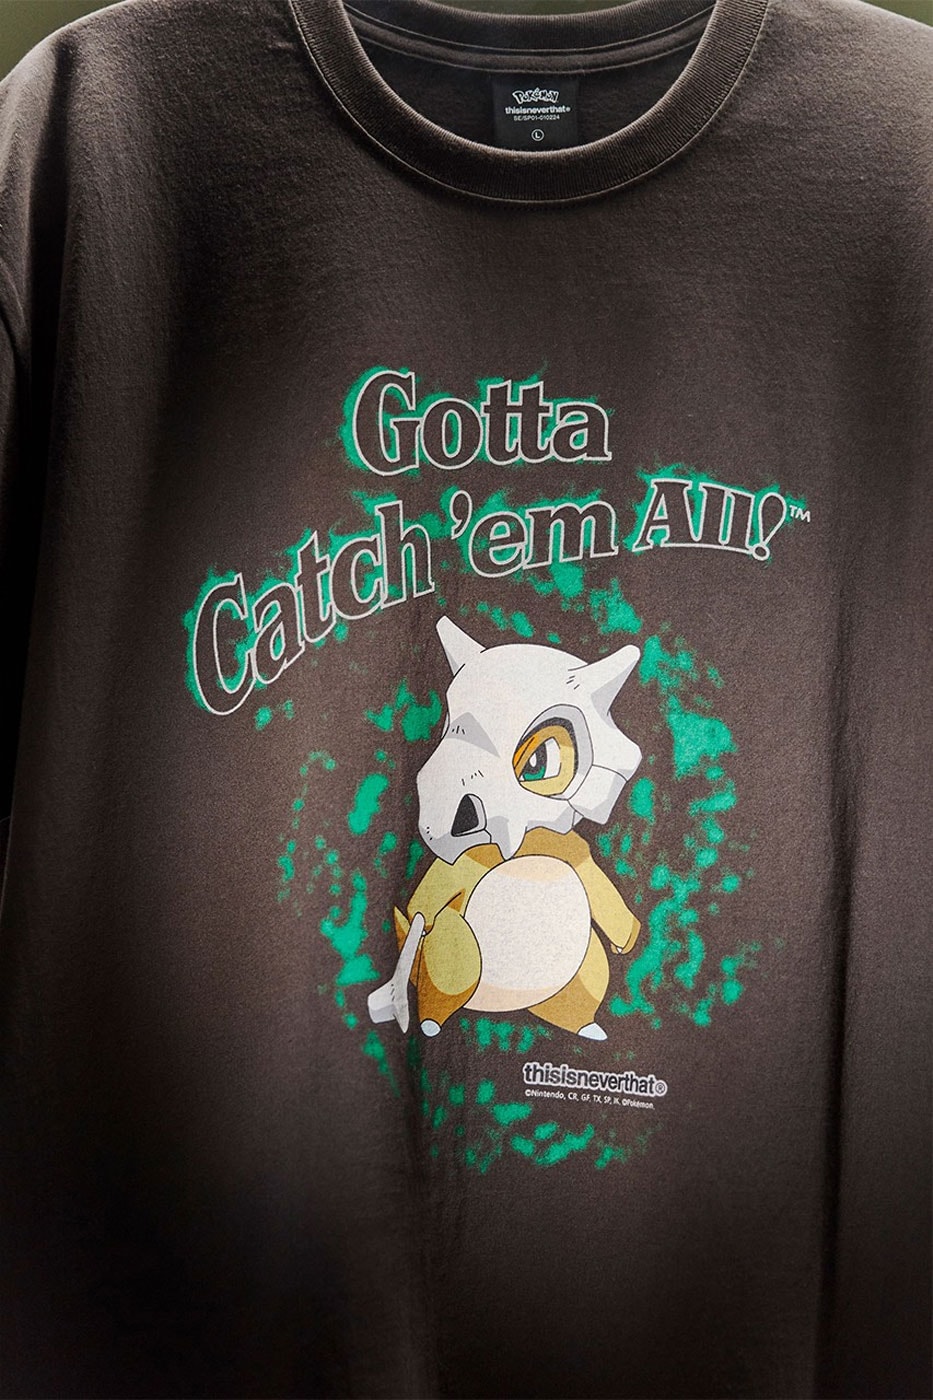 thisisneverthat Pokemon 3rd Collaboration Capsule Collection nintendo graphic tees pikachu mewtwo sticker poster cups caps release info date price